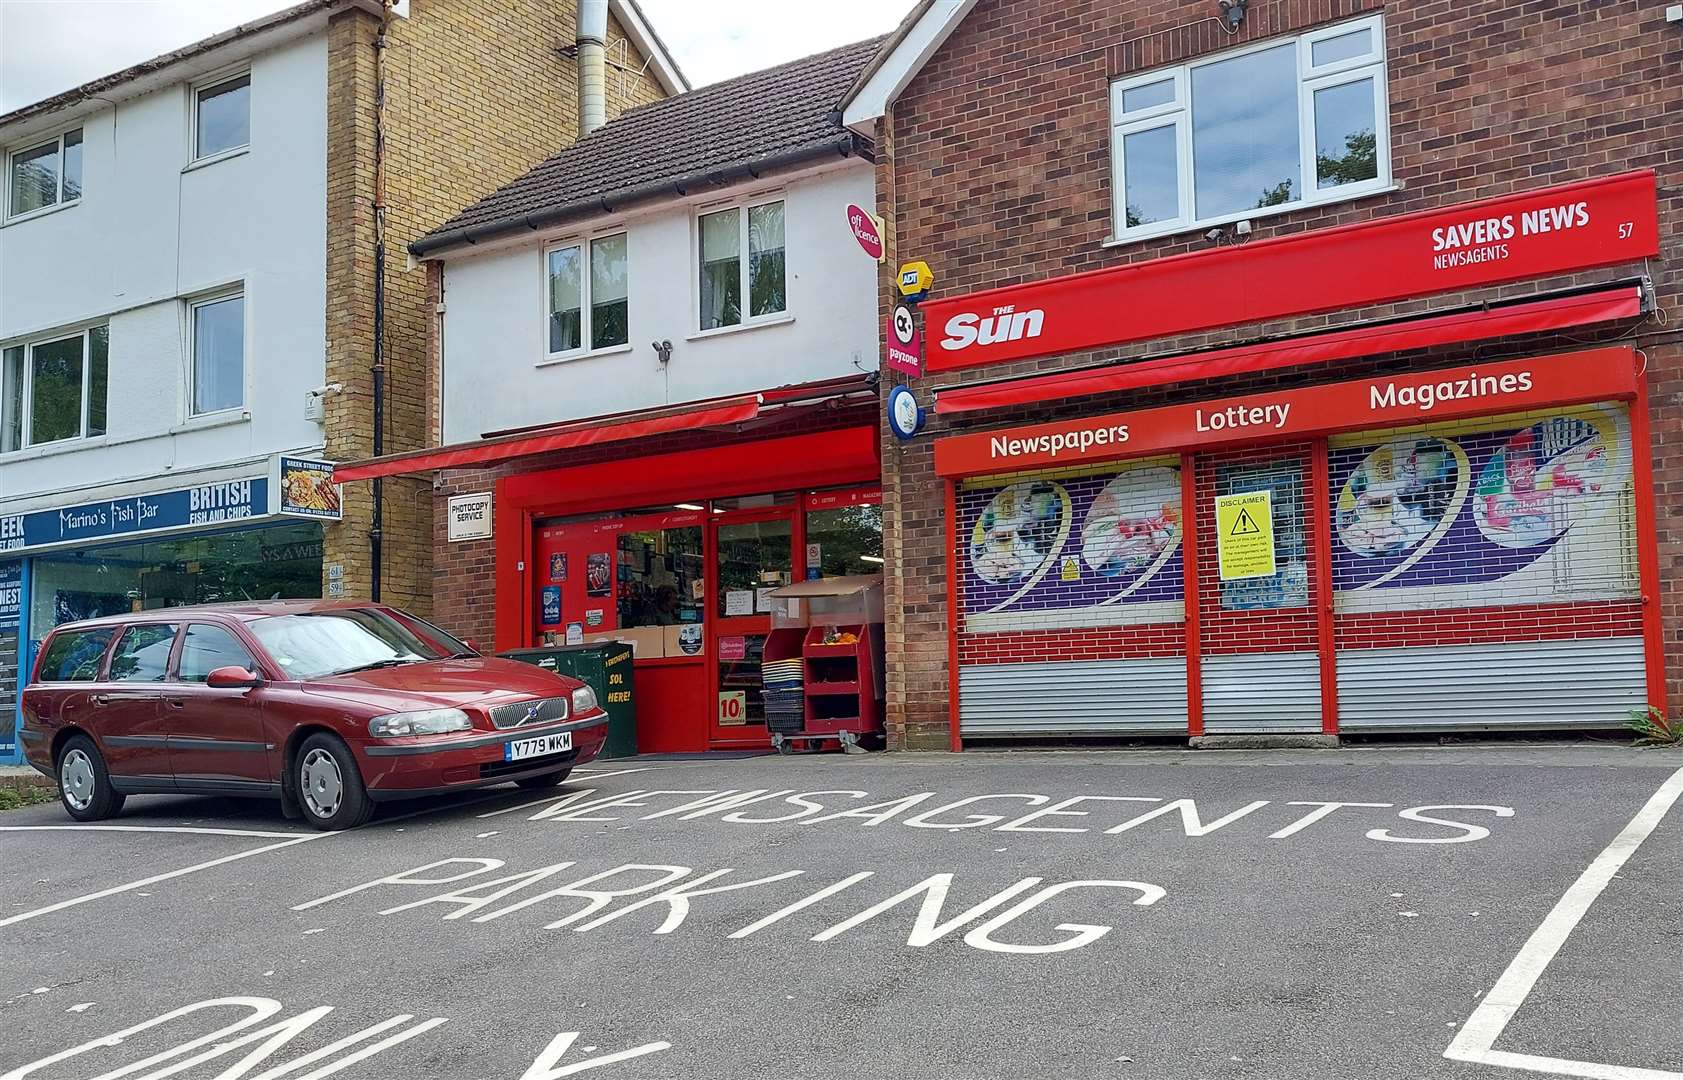 Savers Newsagents is on the end of a parade of shops in Faversham Road, Kennington